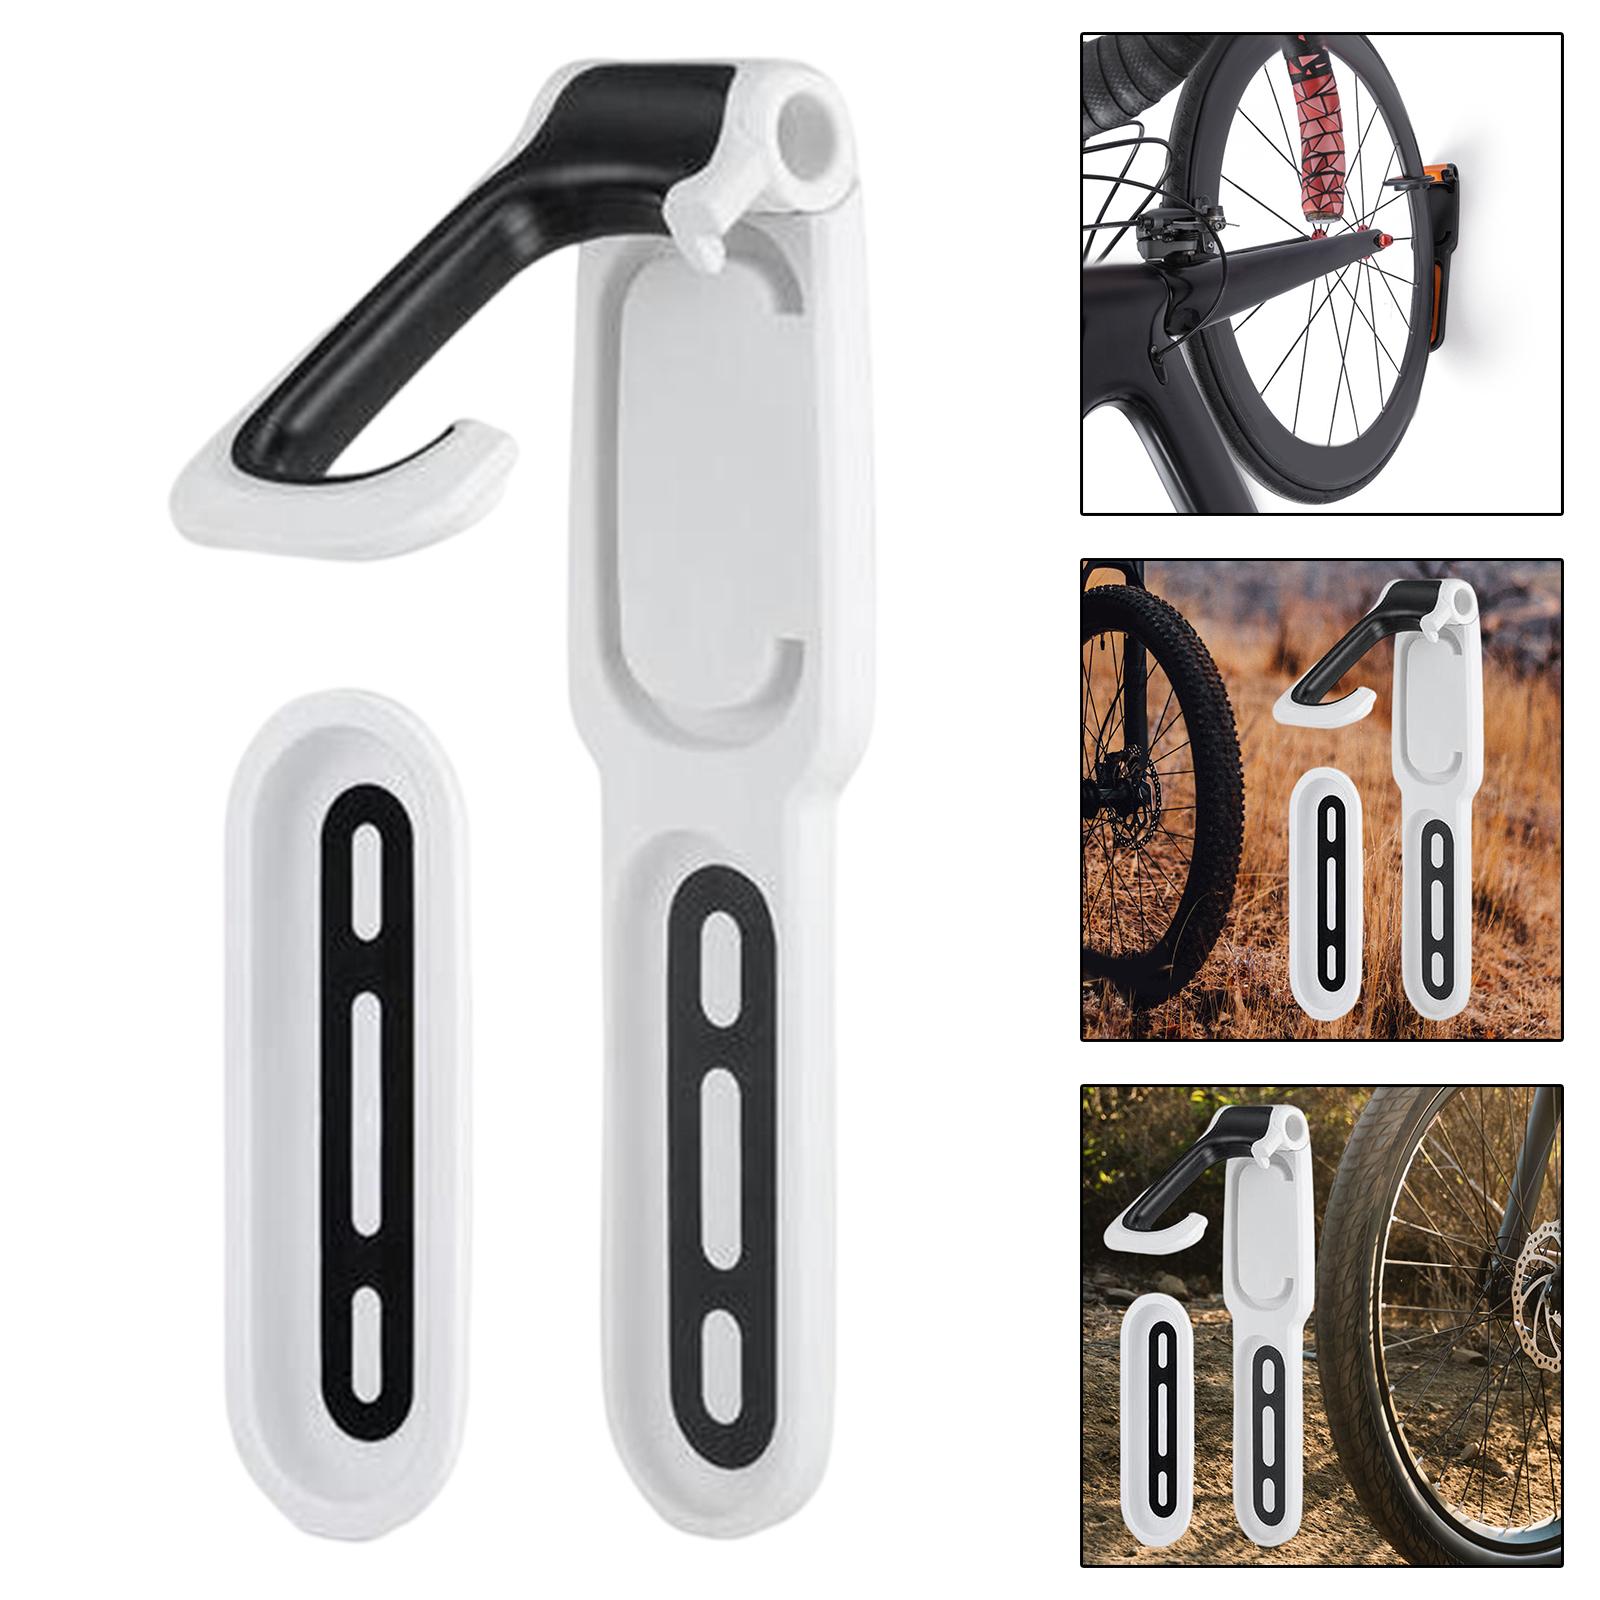 Bike Wall Mount Bike Rack for Garage Vertical Cycling Holder for Bicycles Black White 